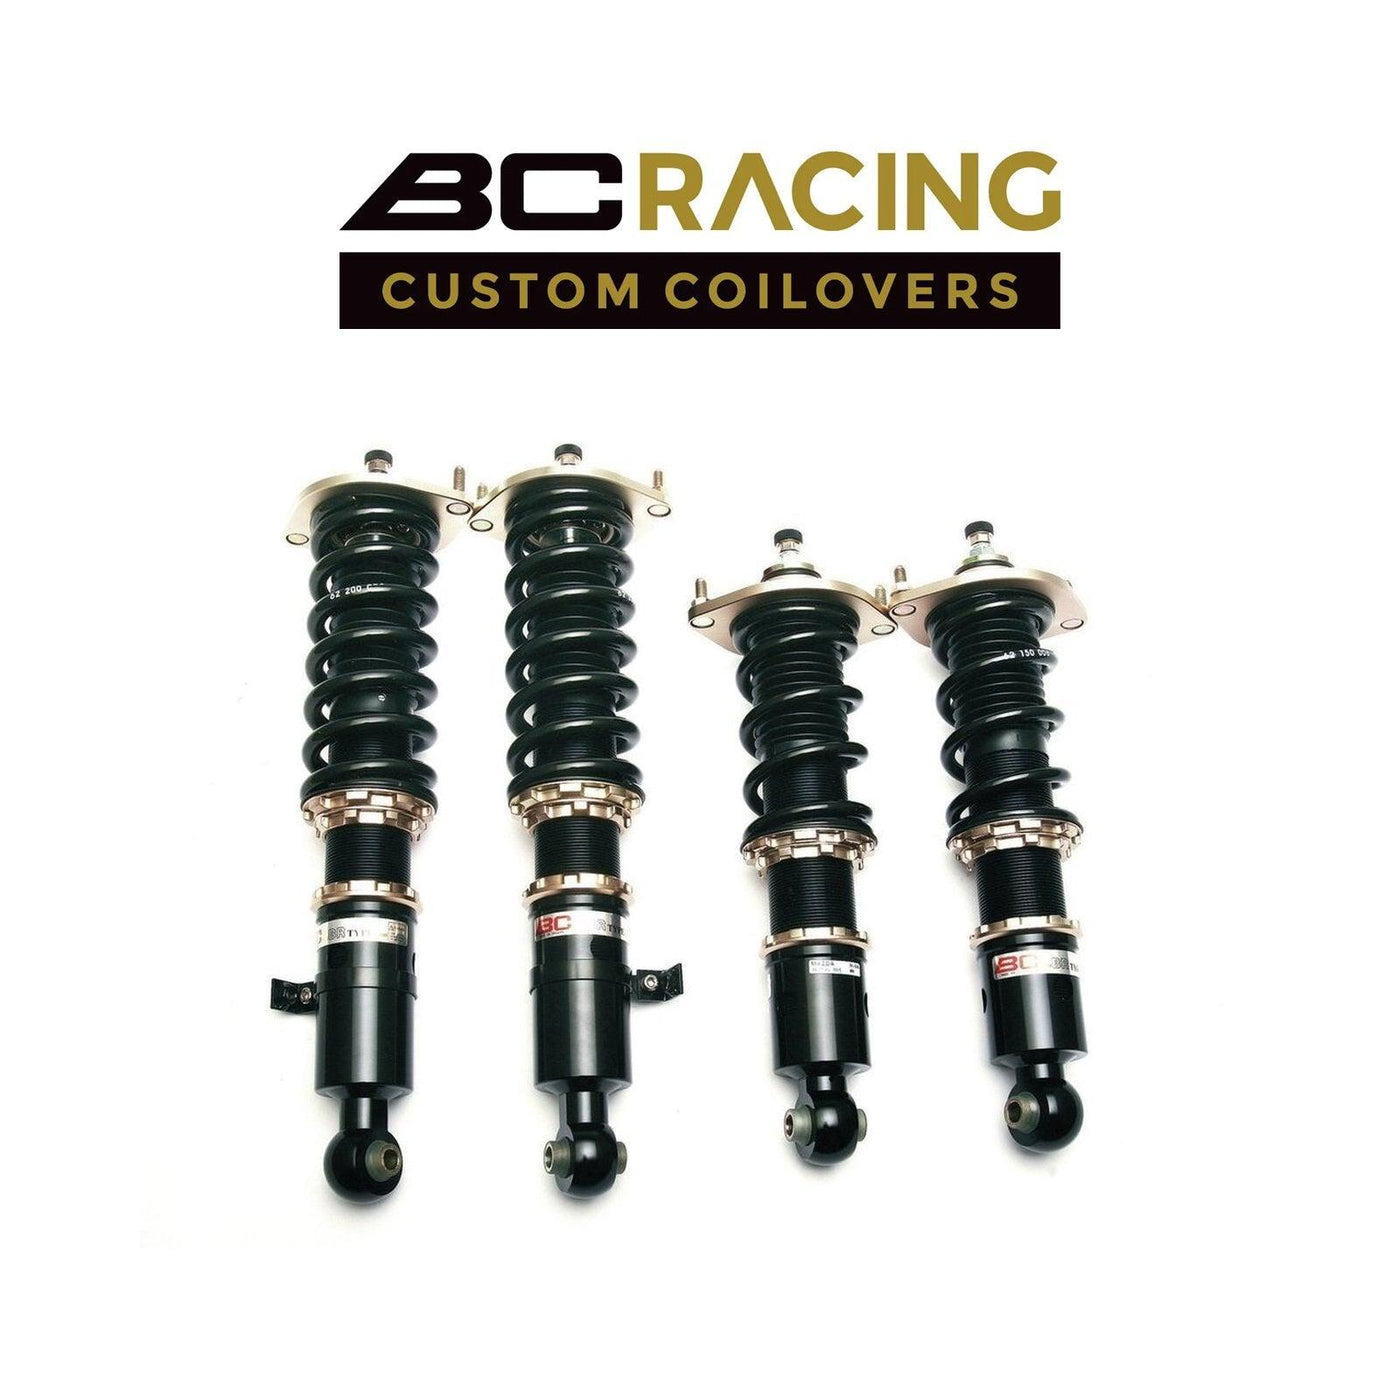 BC Racing Coilovers 1999.5-2005 VW Golf IV - Attacking the Clock Racing